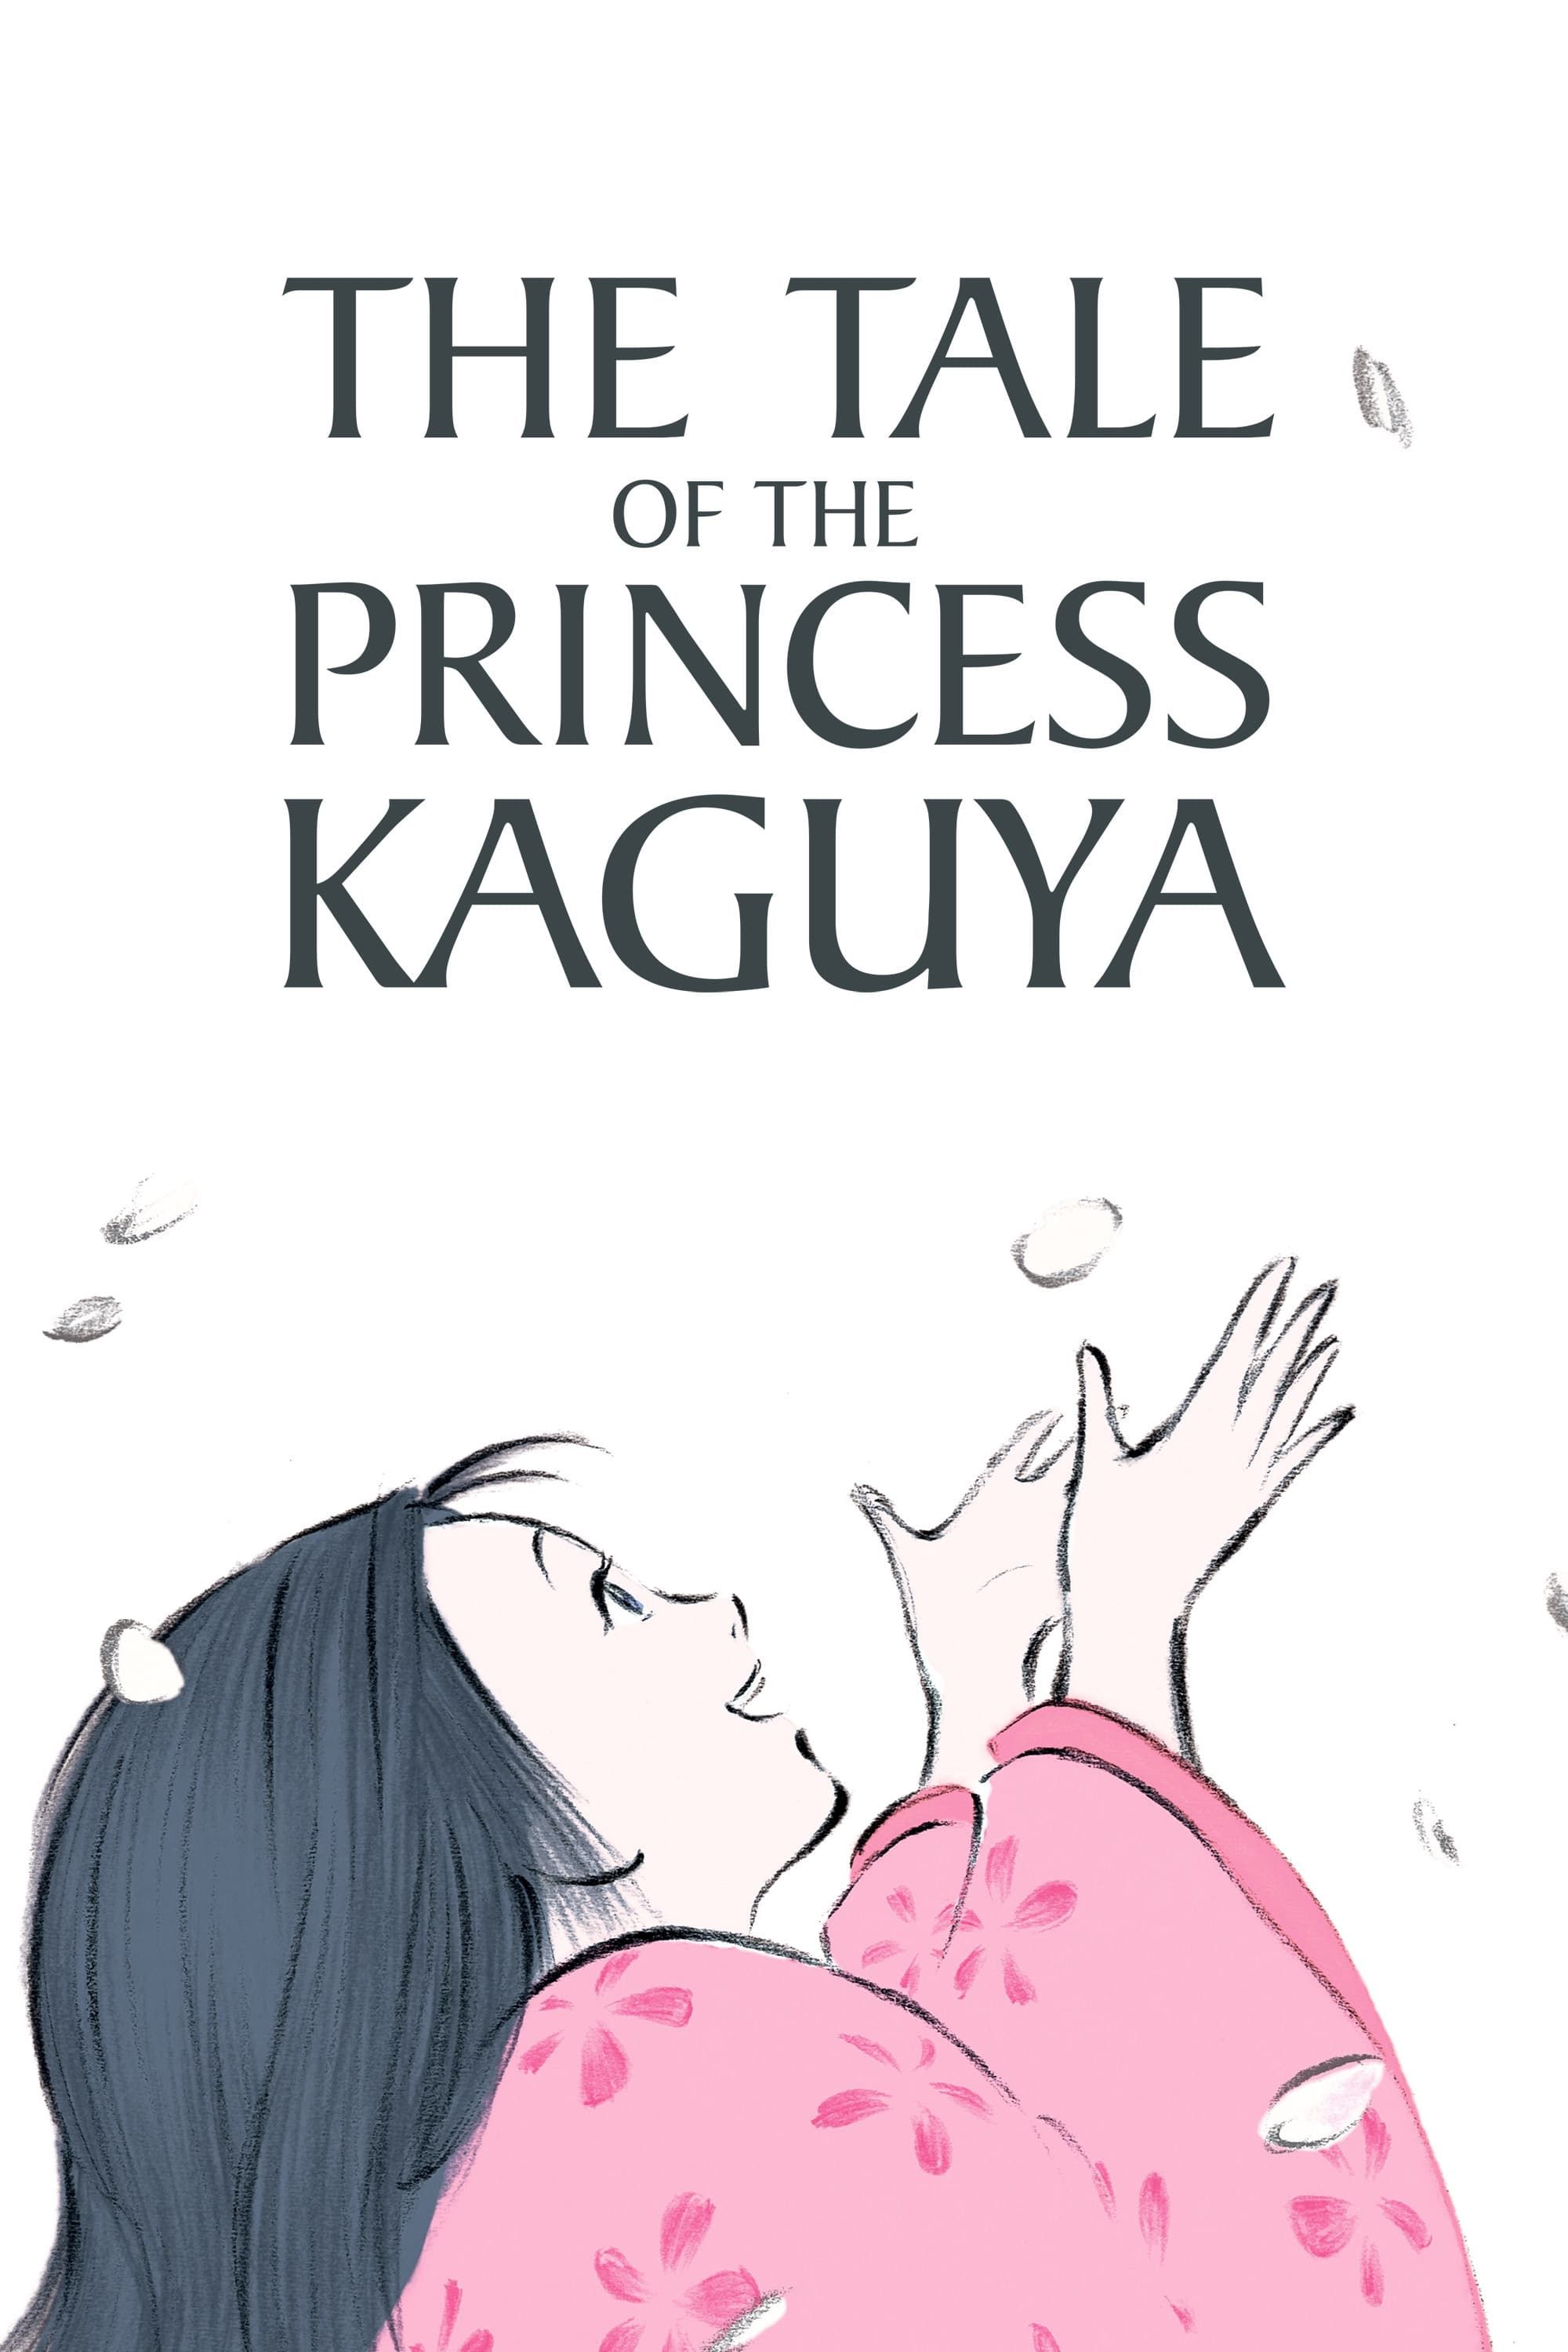 The Tale of The Princess Kaguya 2013 Film Poster